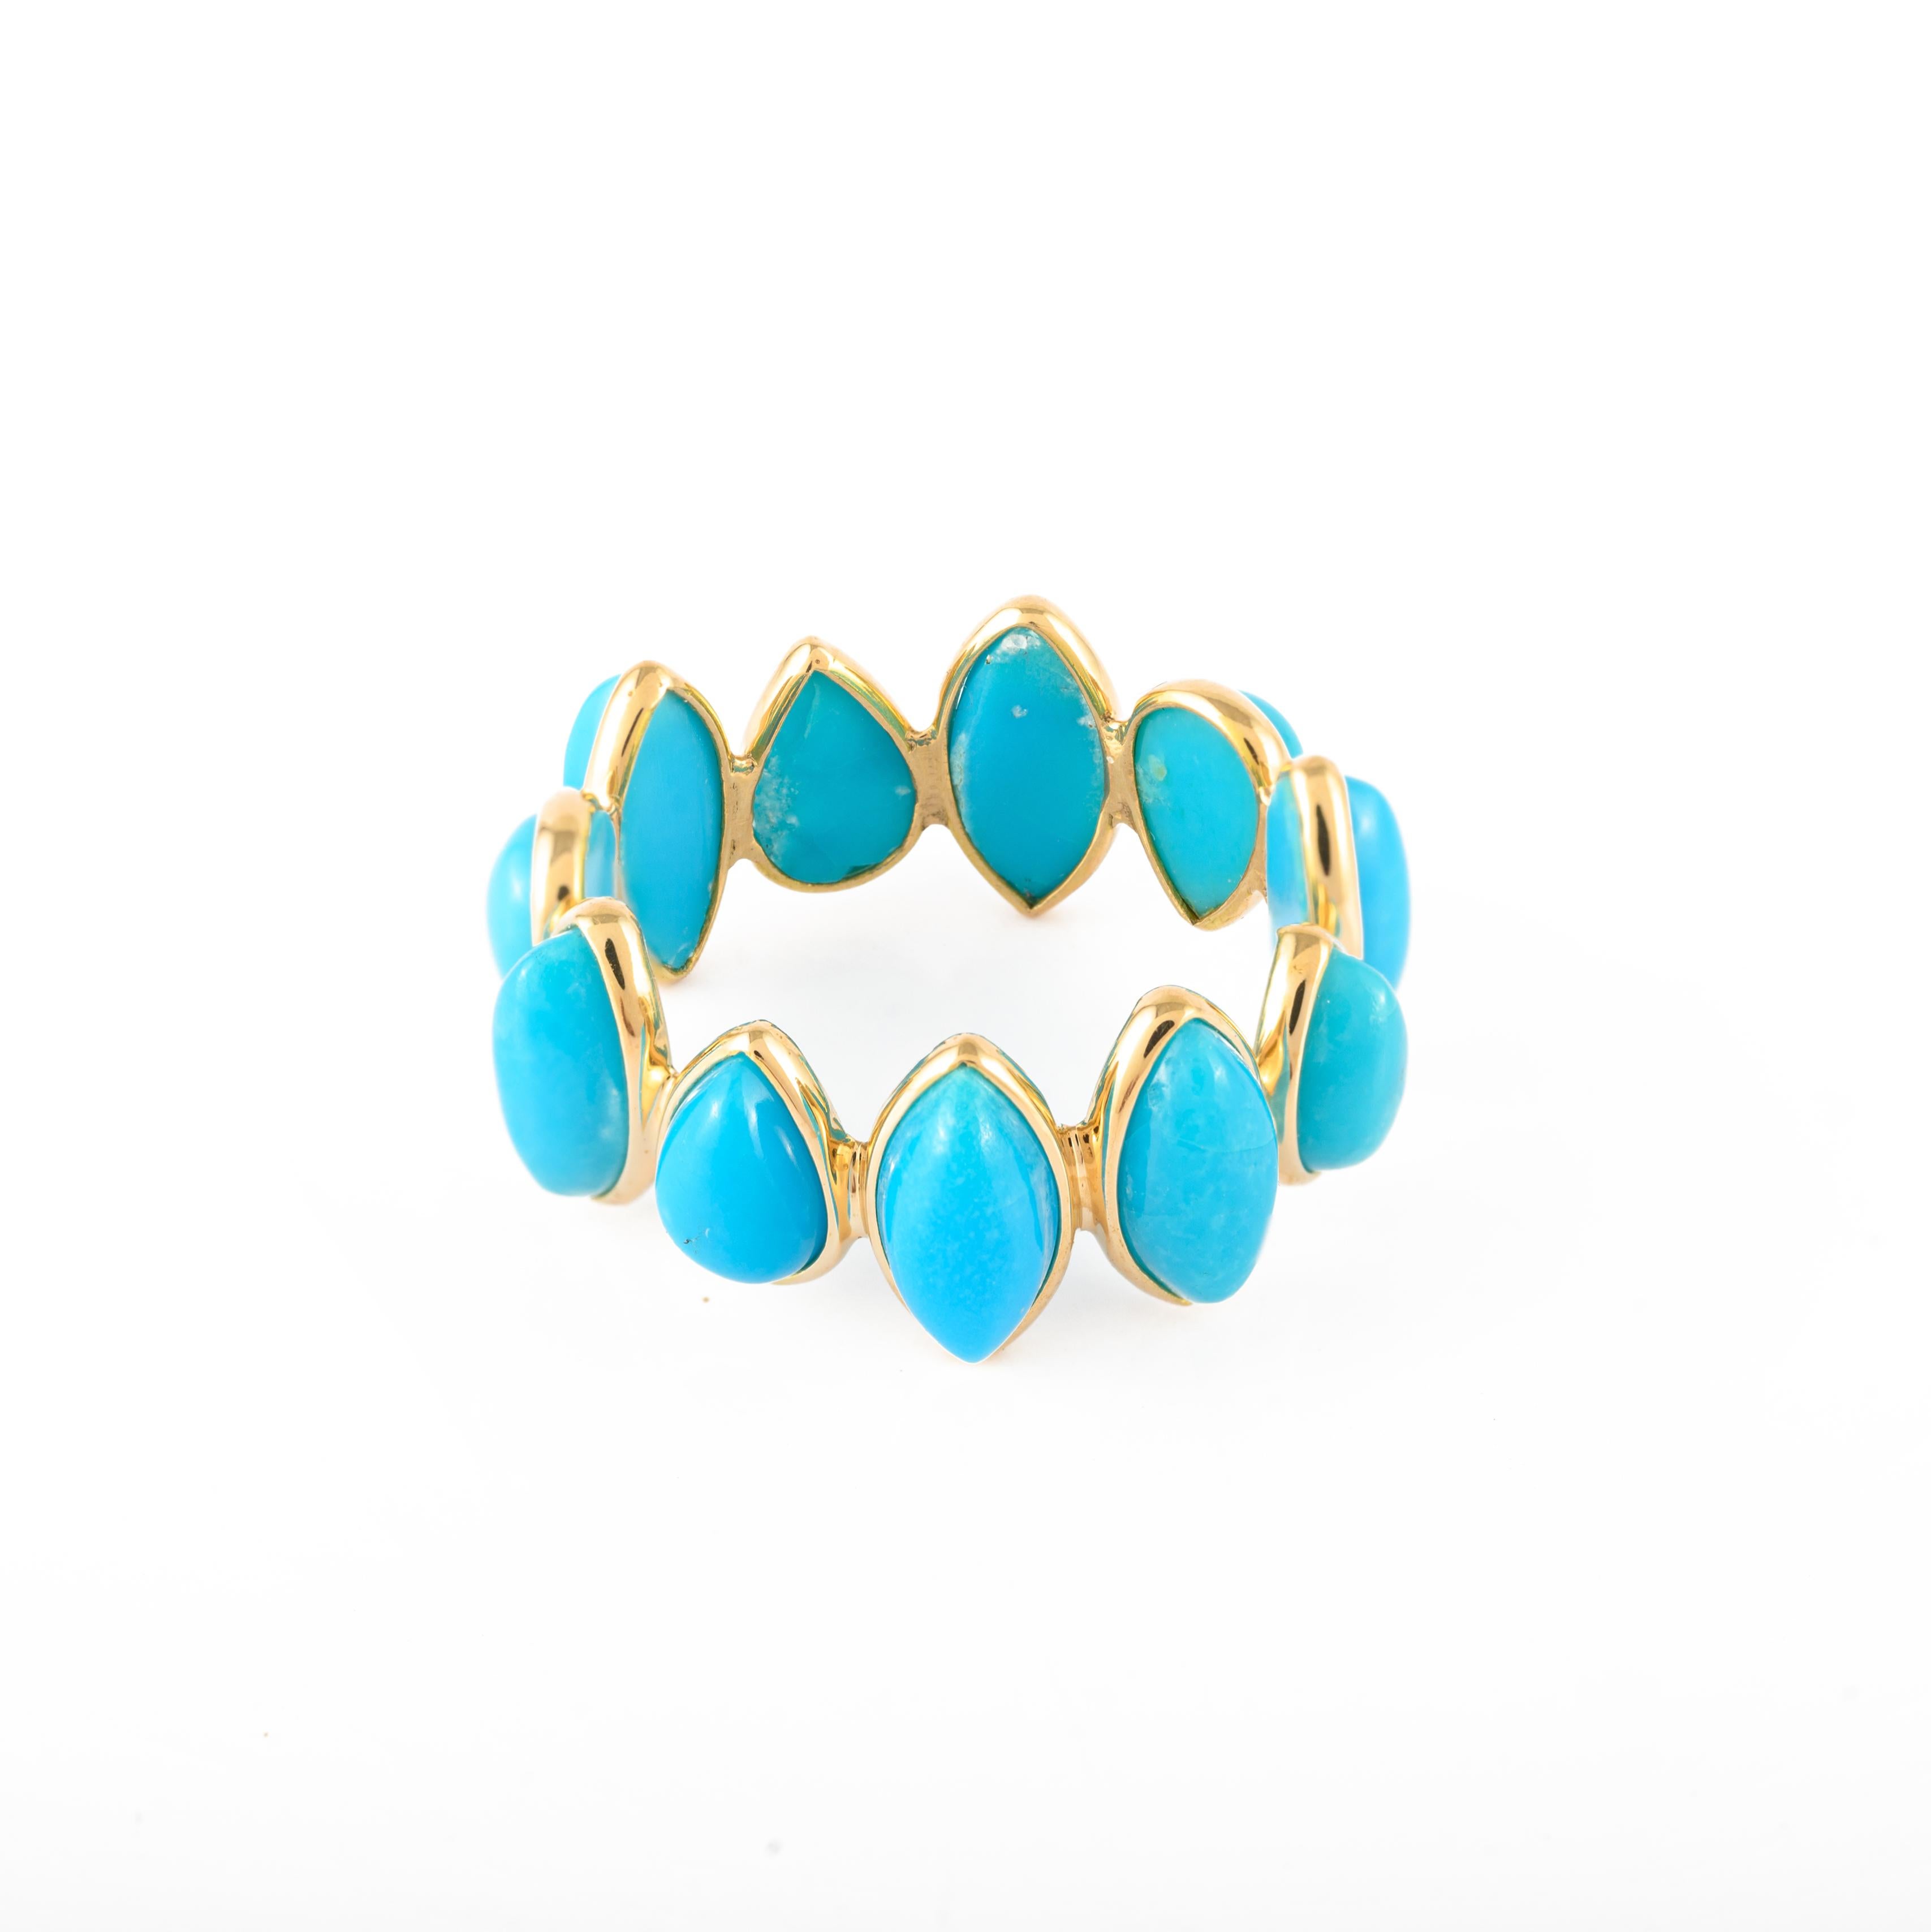 For Sale:  7.58ct Natural Turquoise Stacking Eternity Band Ring in 18k Yellow Gold 6